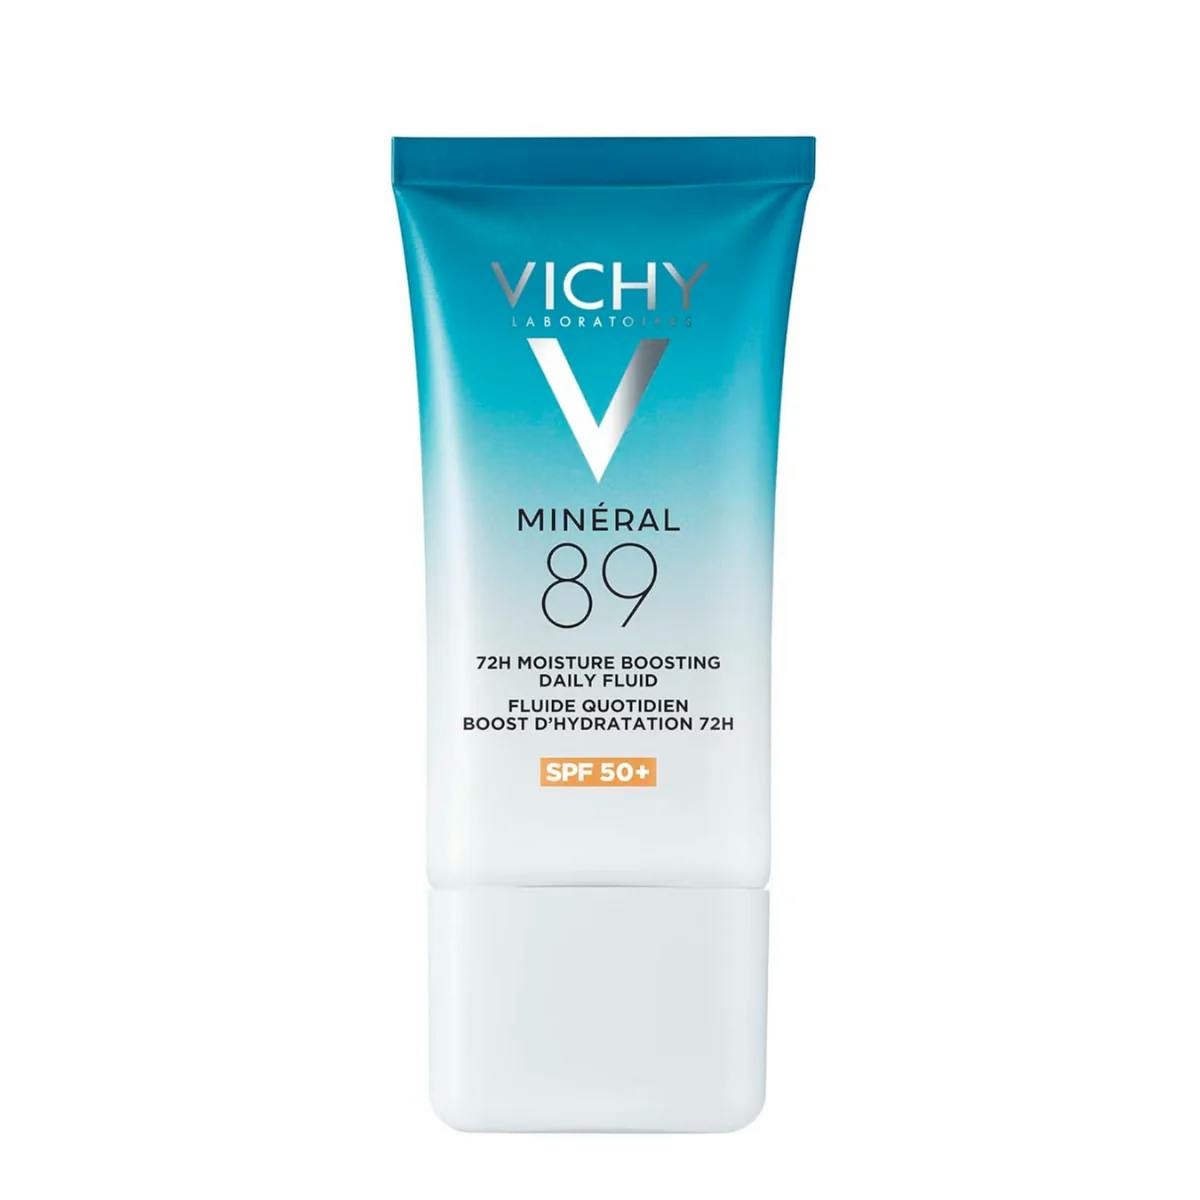 Vichy Mineral 89 72H Moisture Boosting Daily Fluid SPF 50+